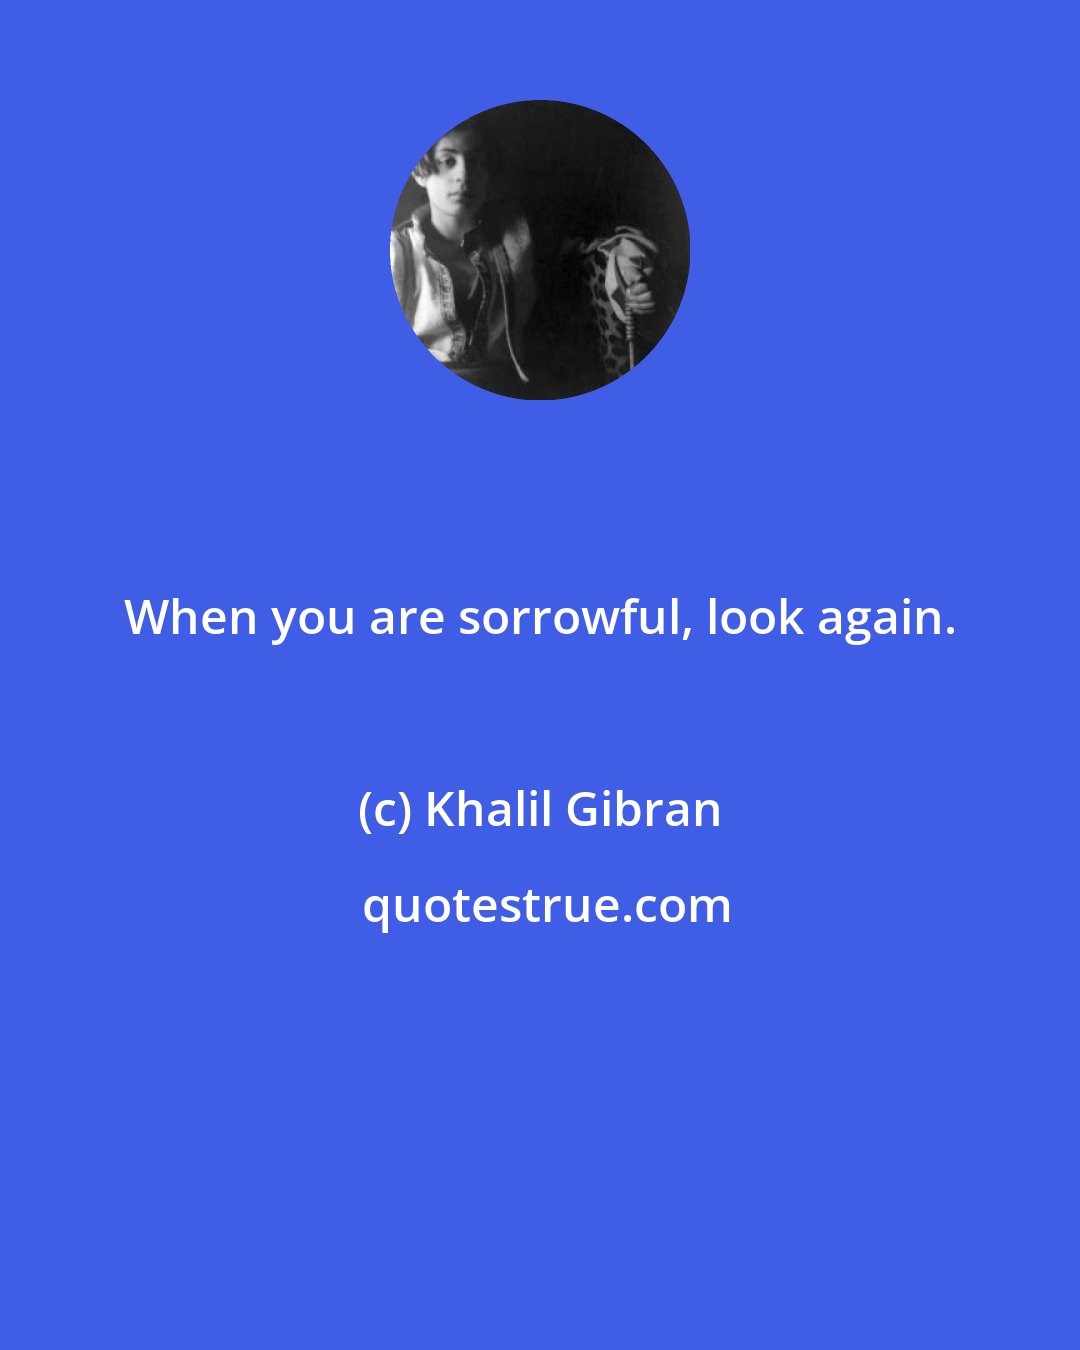 Khalil Gibran: When you are sorrowful, look again.